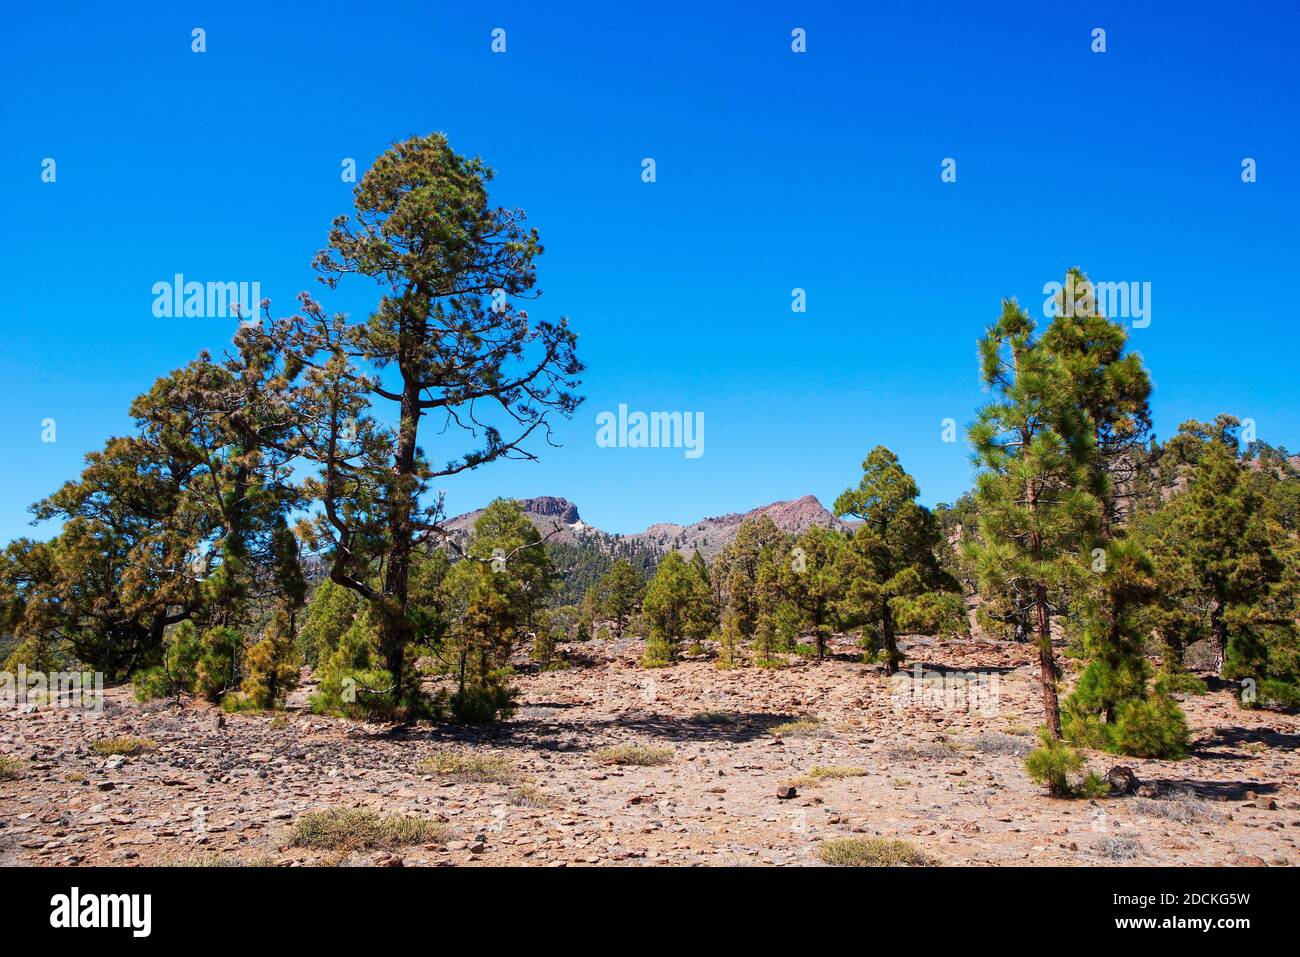 Canary (Pinus canariensis) pine forest on the way to the Sombrero de Chasna, Teide National Park, Tenerife, Canary Islands, Spain Stock Photo